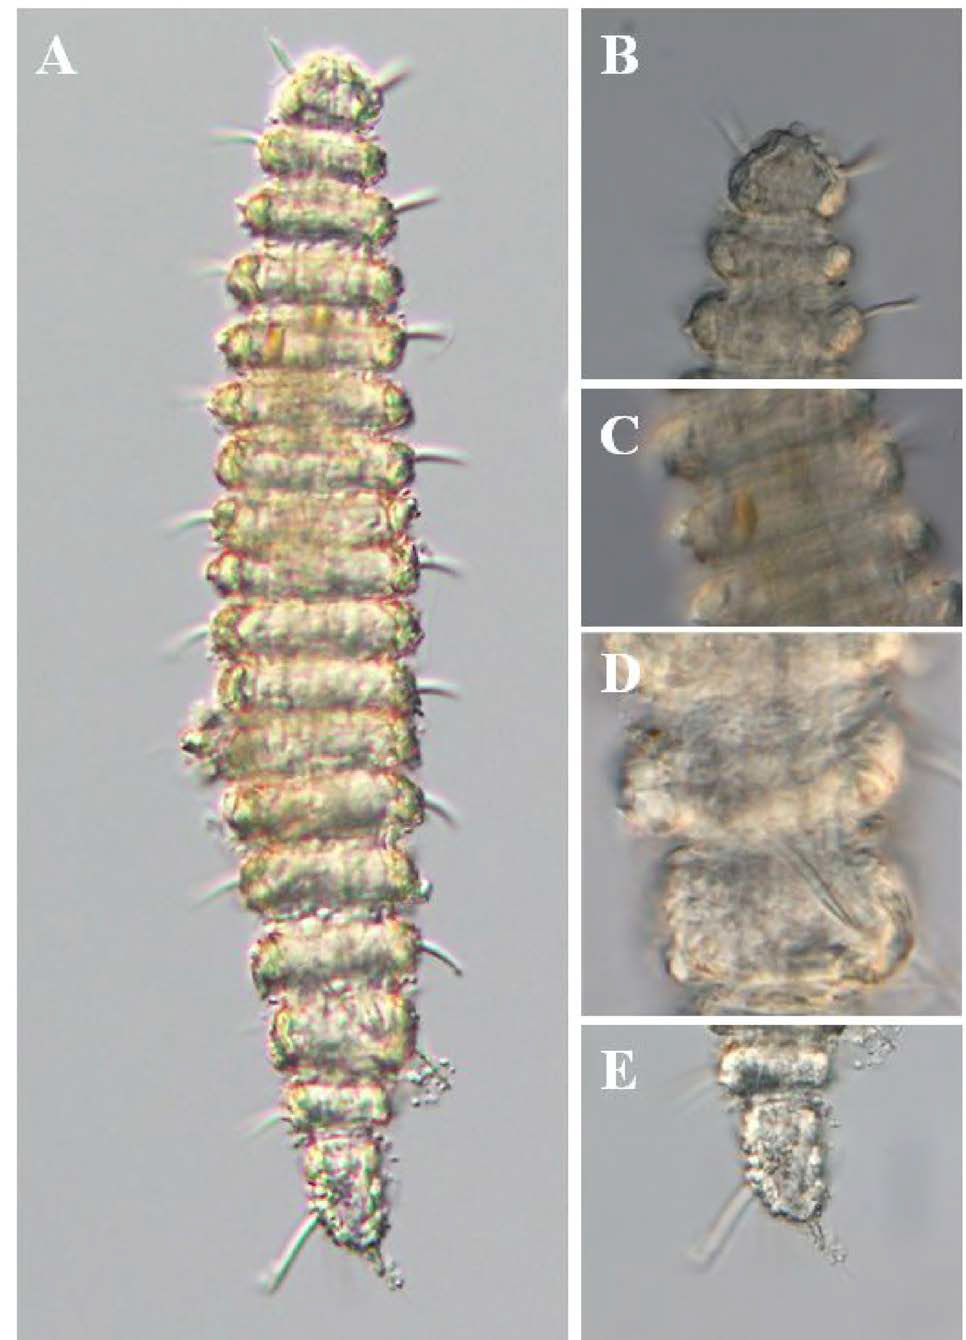 Desmoscolex n. sp. 3, DIC photomicrographs, male, lateral view